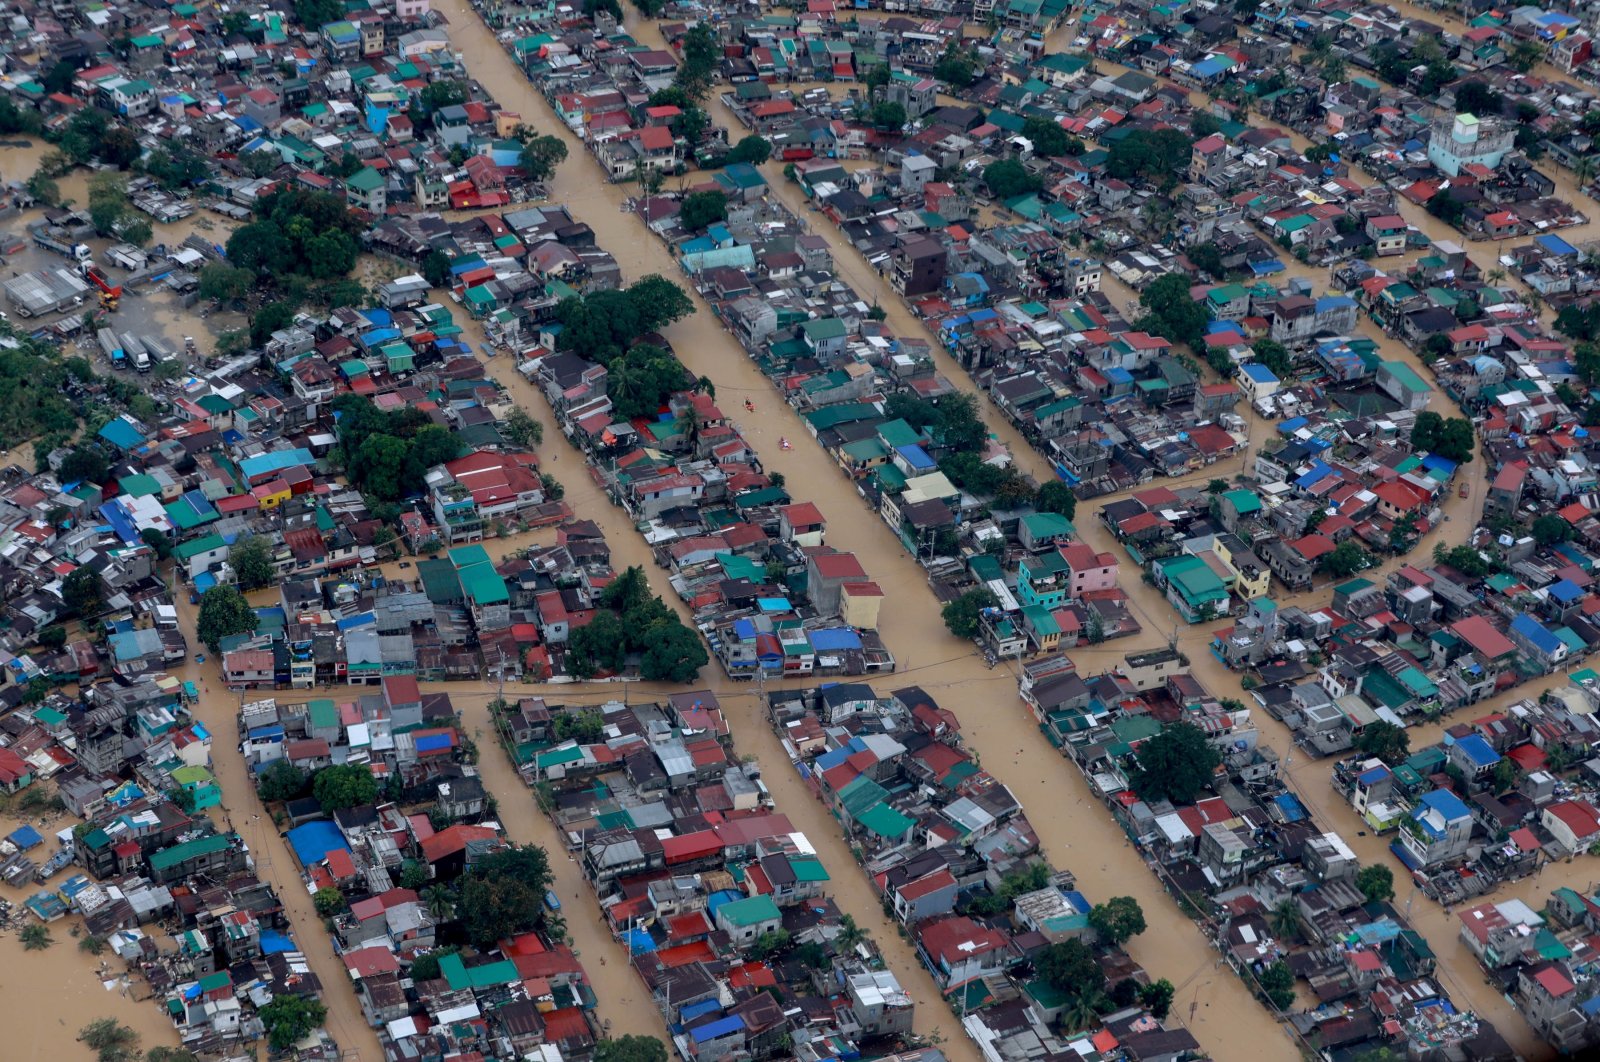 An aerial view of the flooding in Manila, Philippines, as Typhoon Vamco unleashed some of the worst flooding in years in the capital, Nov. 12, 2020. (Presidential Photo Handout via Reuters)